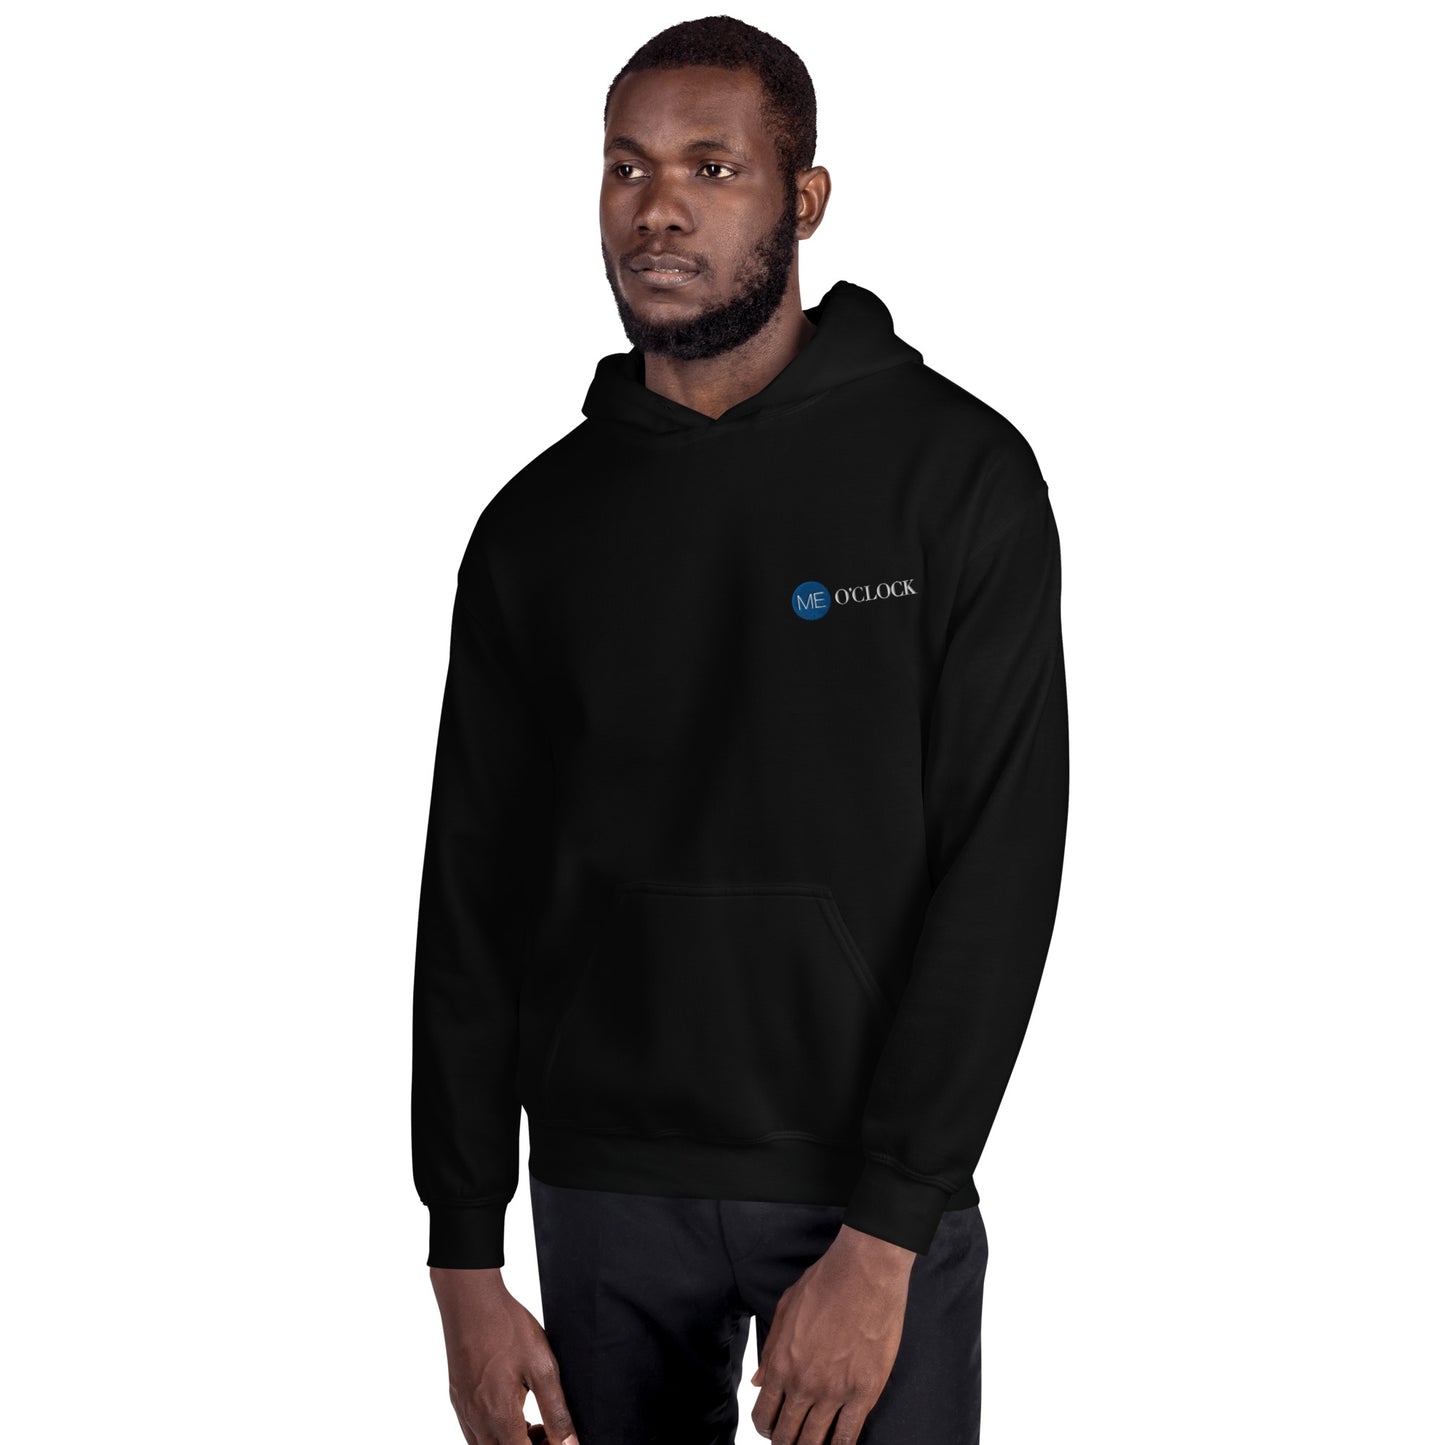 ME O'Clock Embroidered Pullover Hoodie